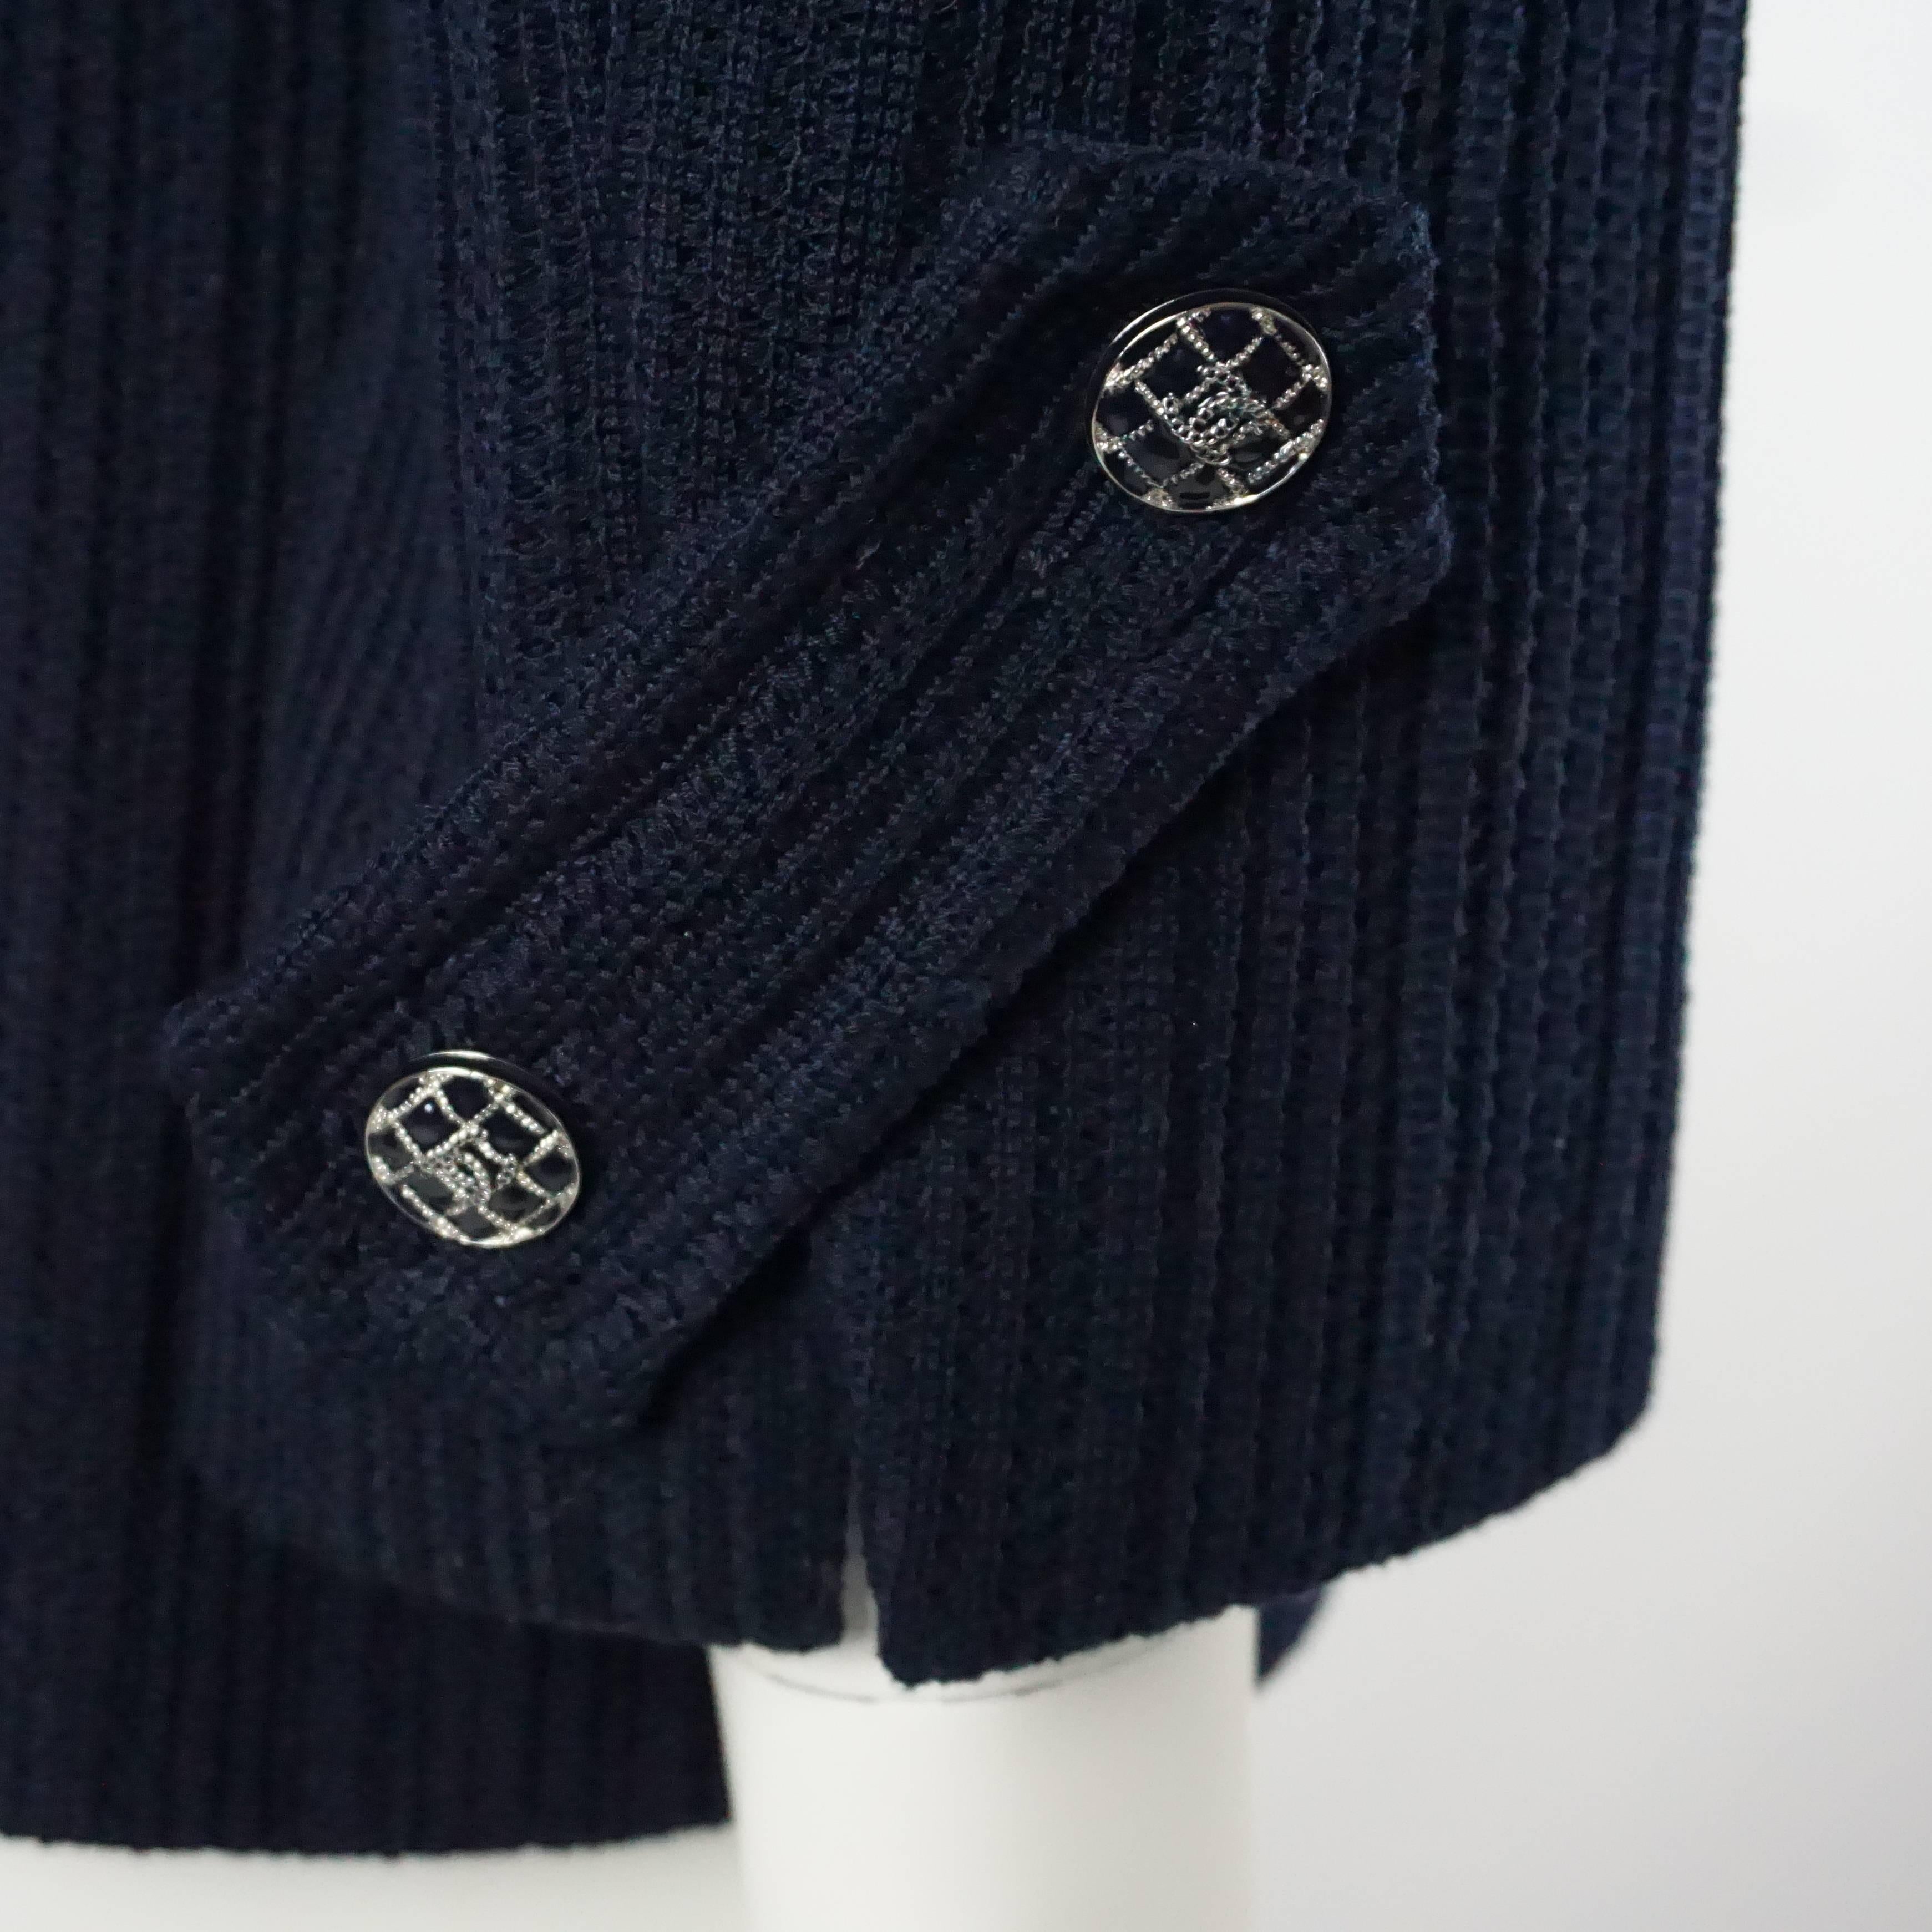 Women's Chanel Navy Cotton Jacket with Enamel Buttons - 42